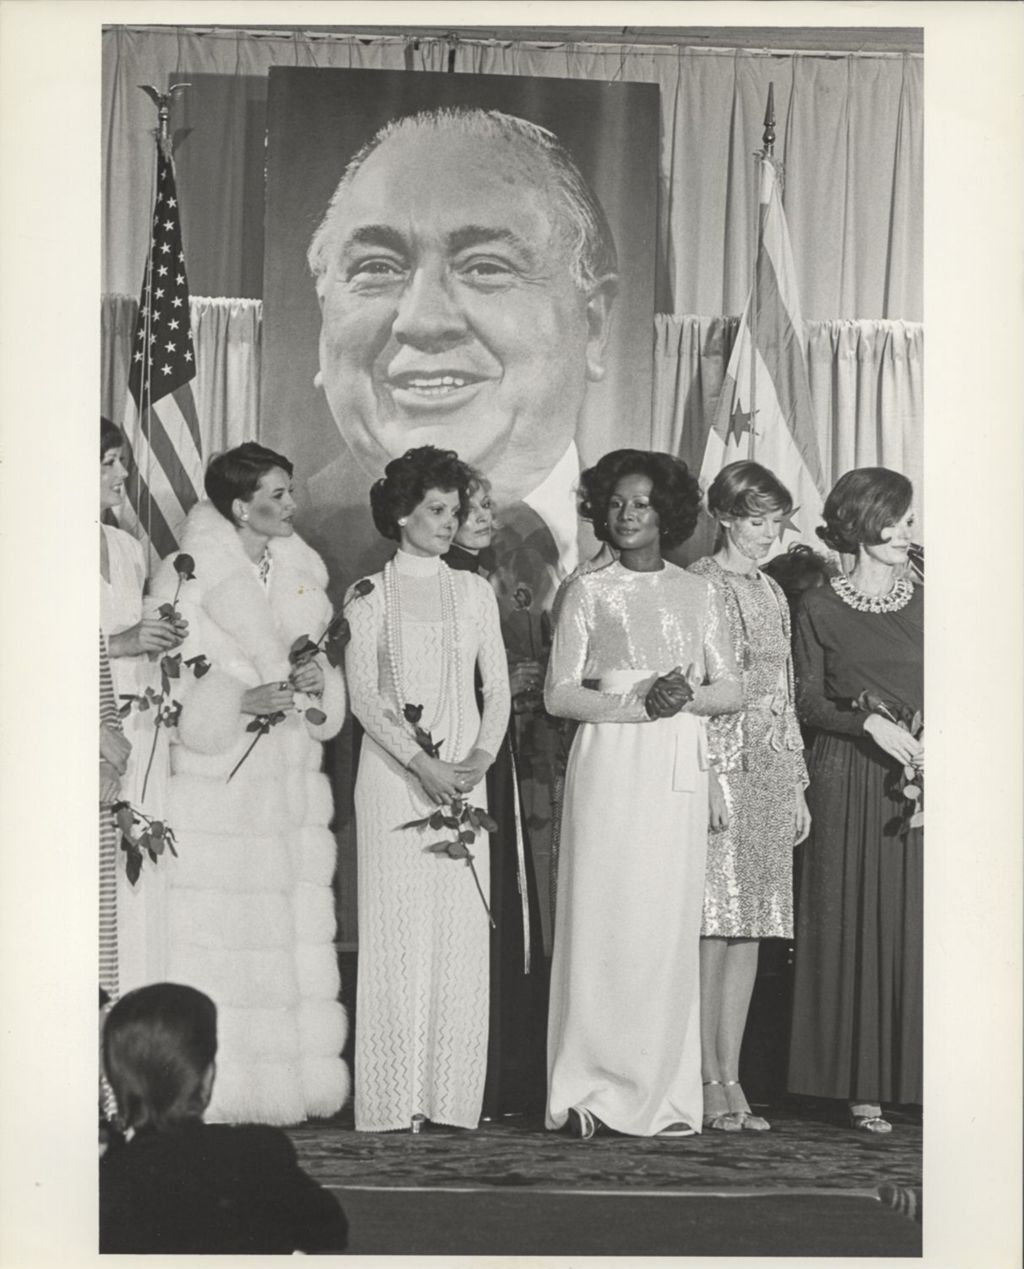 Group of women modeling in front of a portrait of Richard J. Daley